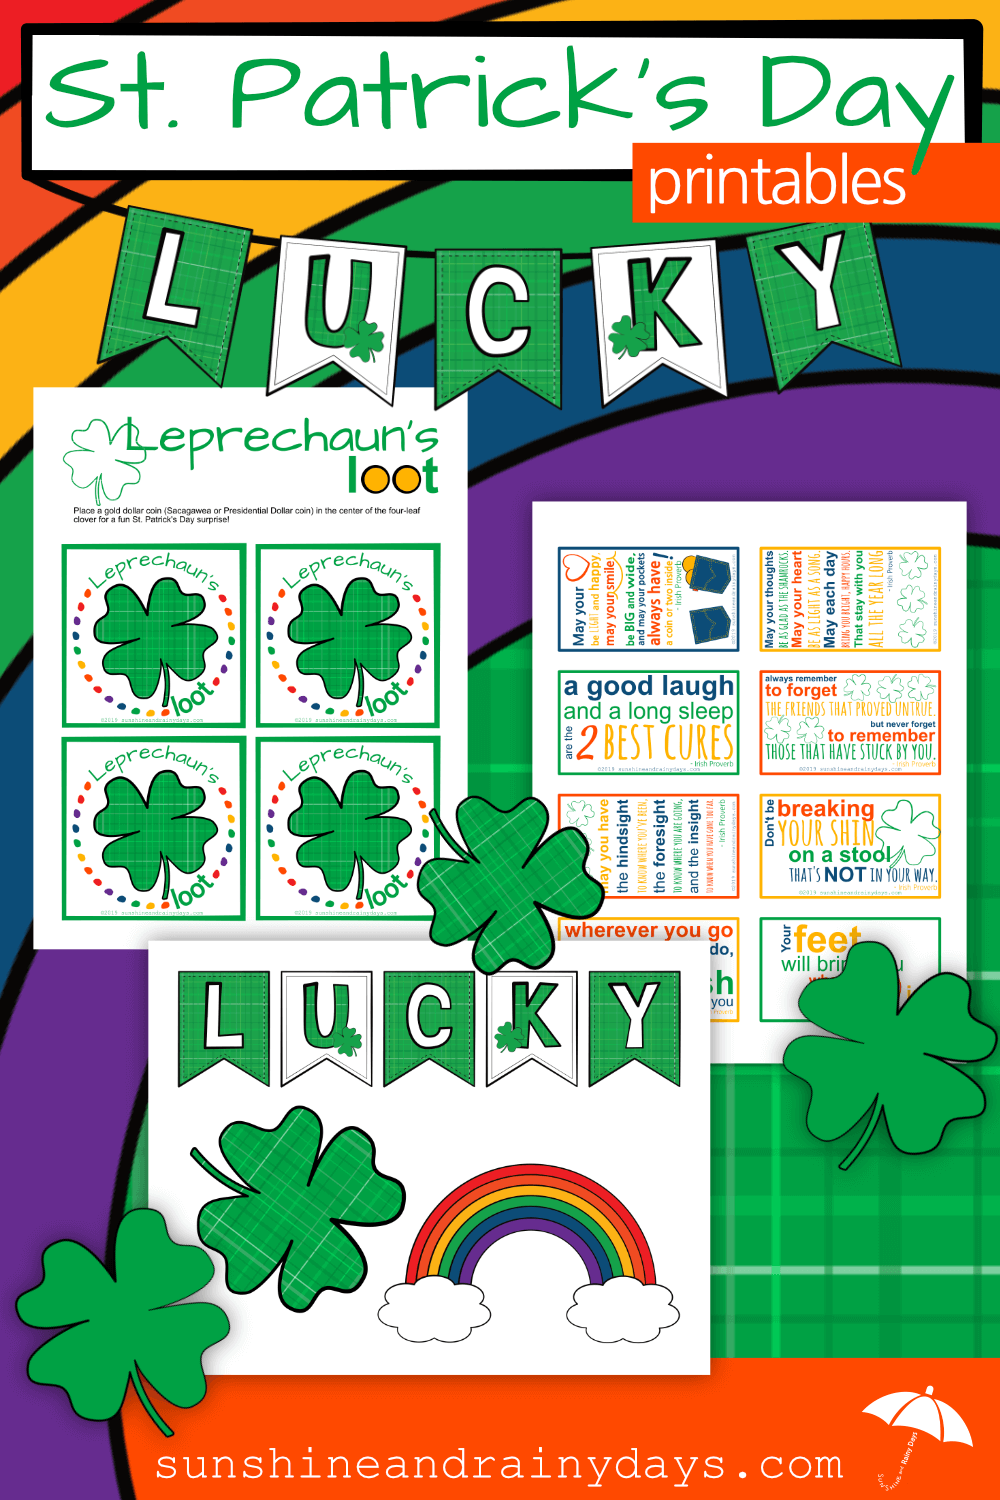 St. Patrick's Day is a holiday that celebrates all things Irish. It's all about rainbows, pinches, gold, leprechauns, green, shamrocks, and St. Patrick ... and we've got St. Patrick's Day Printables to help make it extra fun!